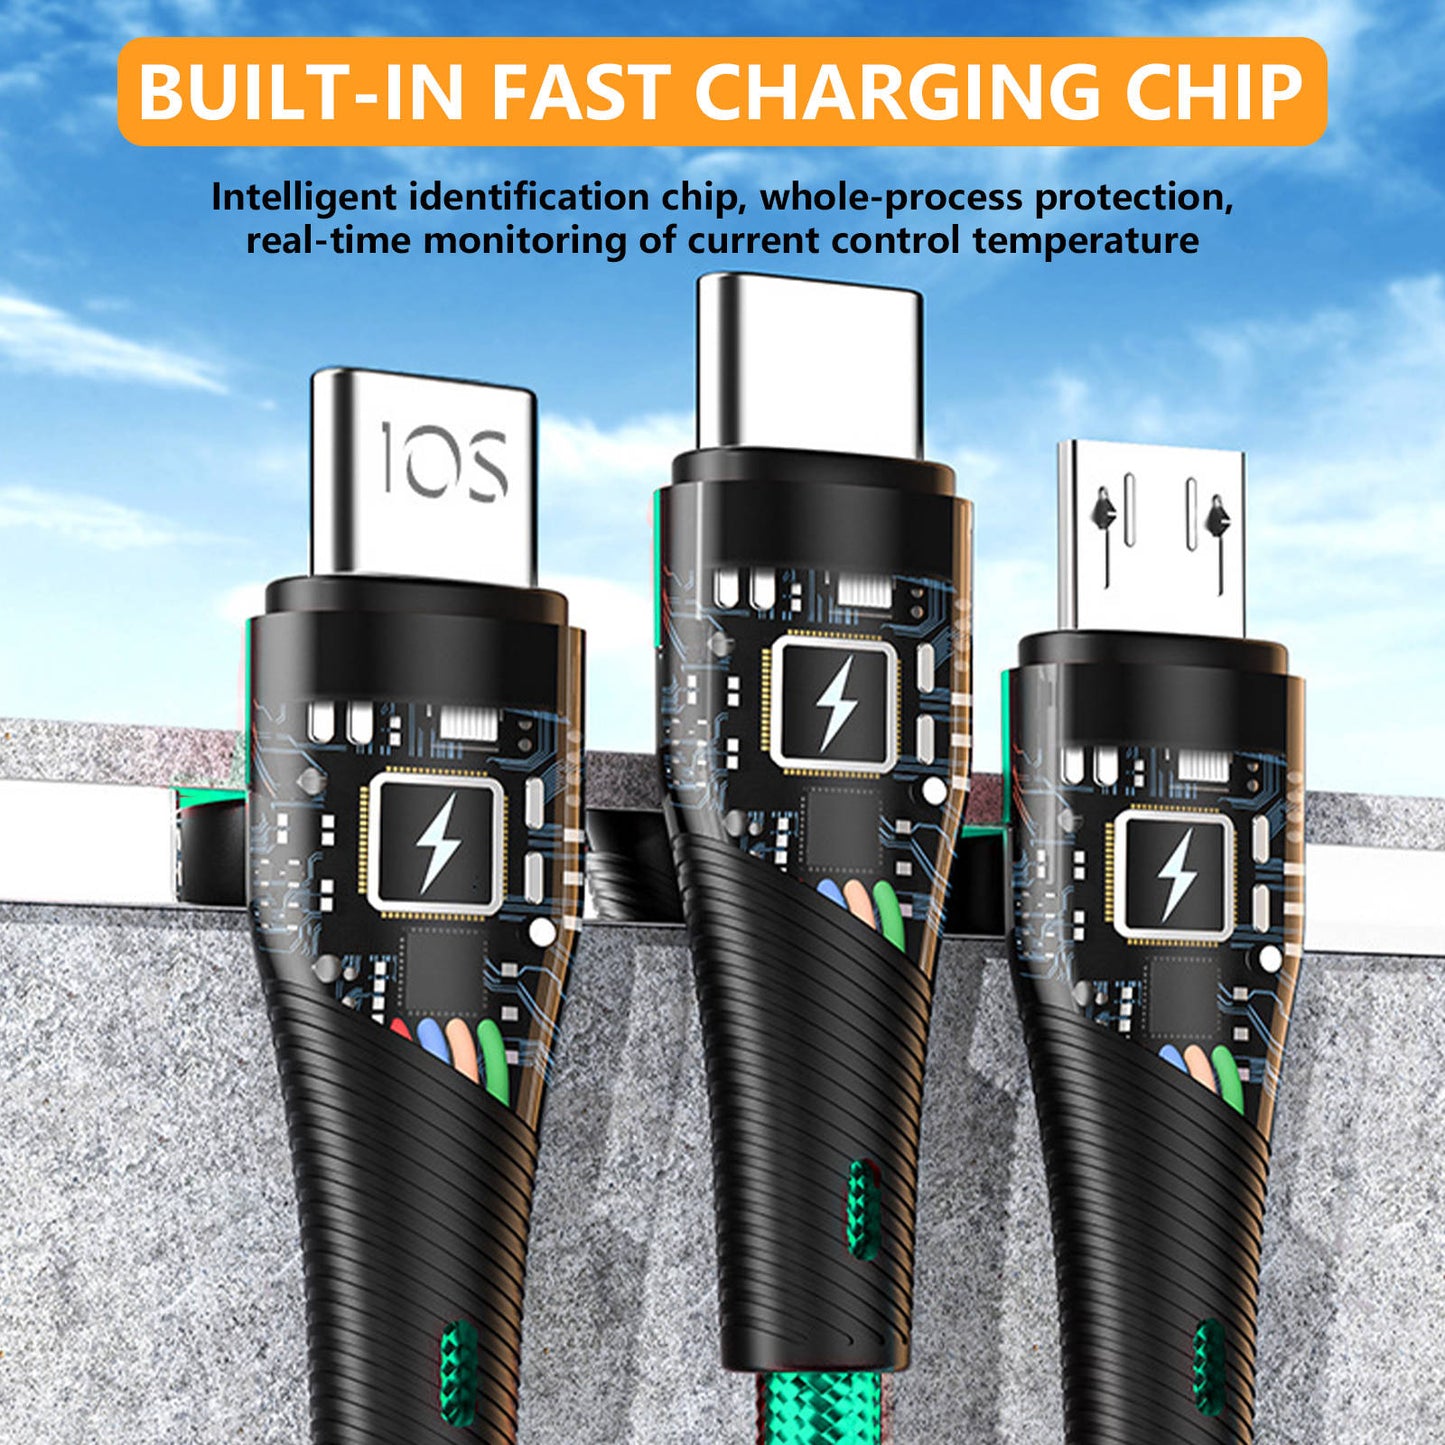 Mobax Nylon Woven 100W Super Fast Charging 3-in-1 USB Charger Charging Cable Green